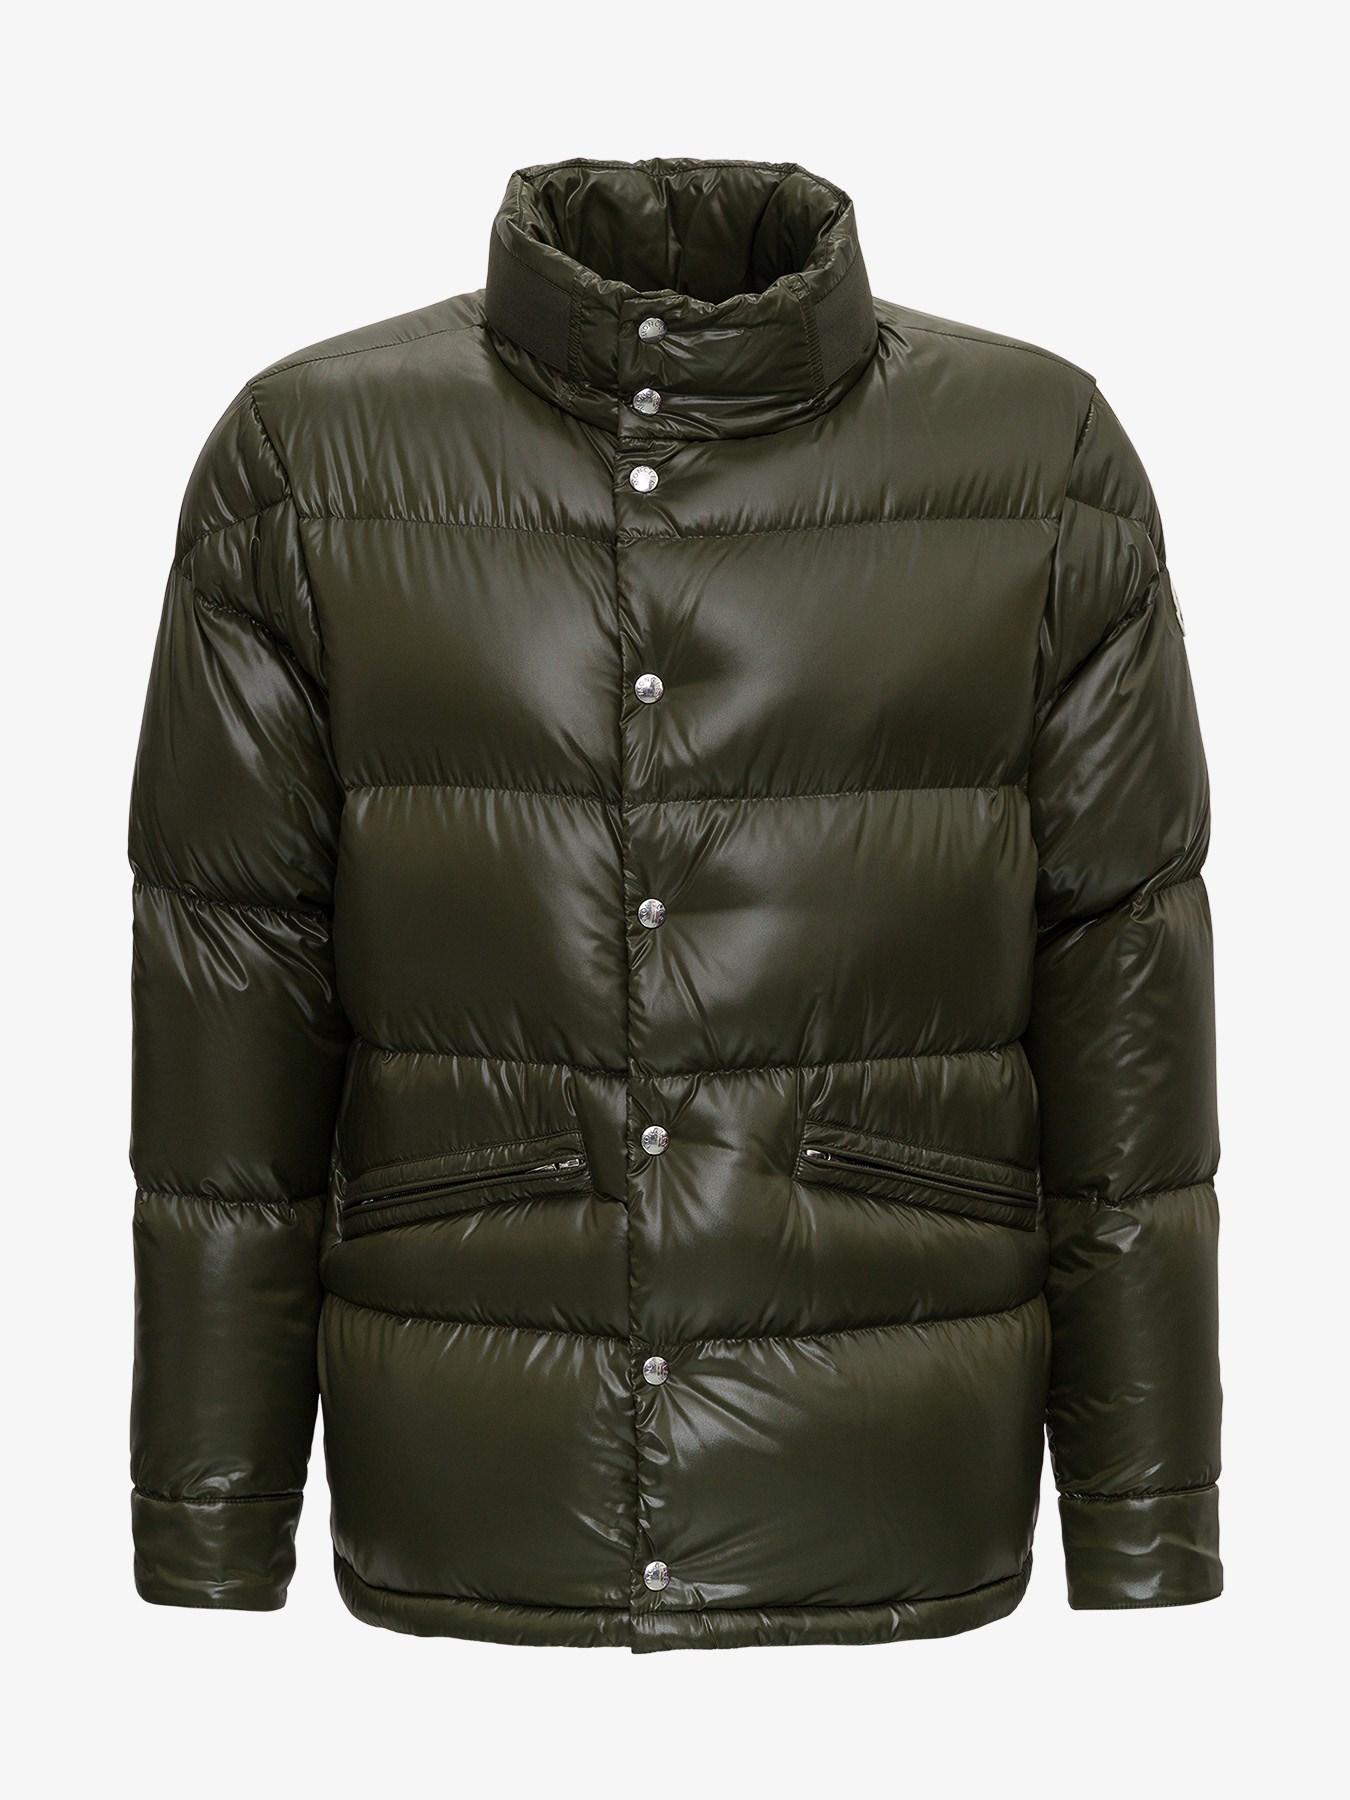 Moncler Synthetic Rateau Down Jacket in Green for Men - Lyst